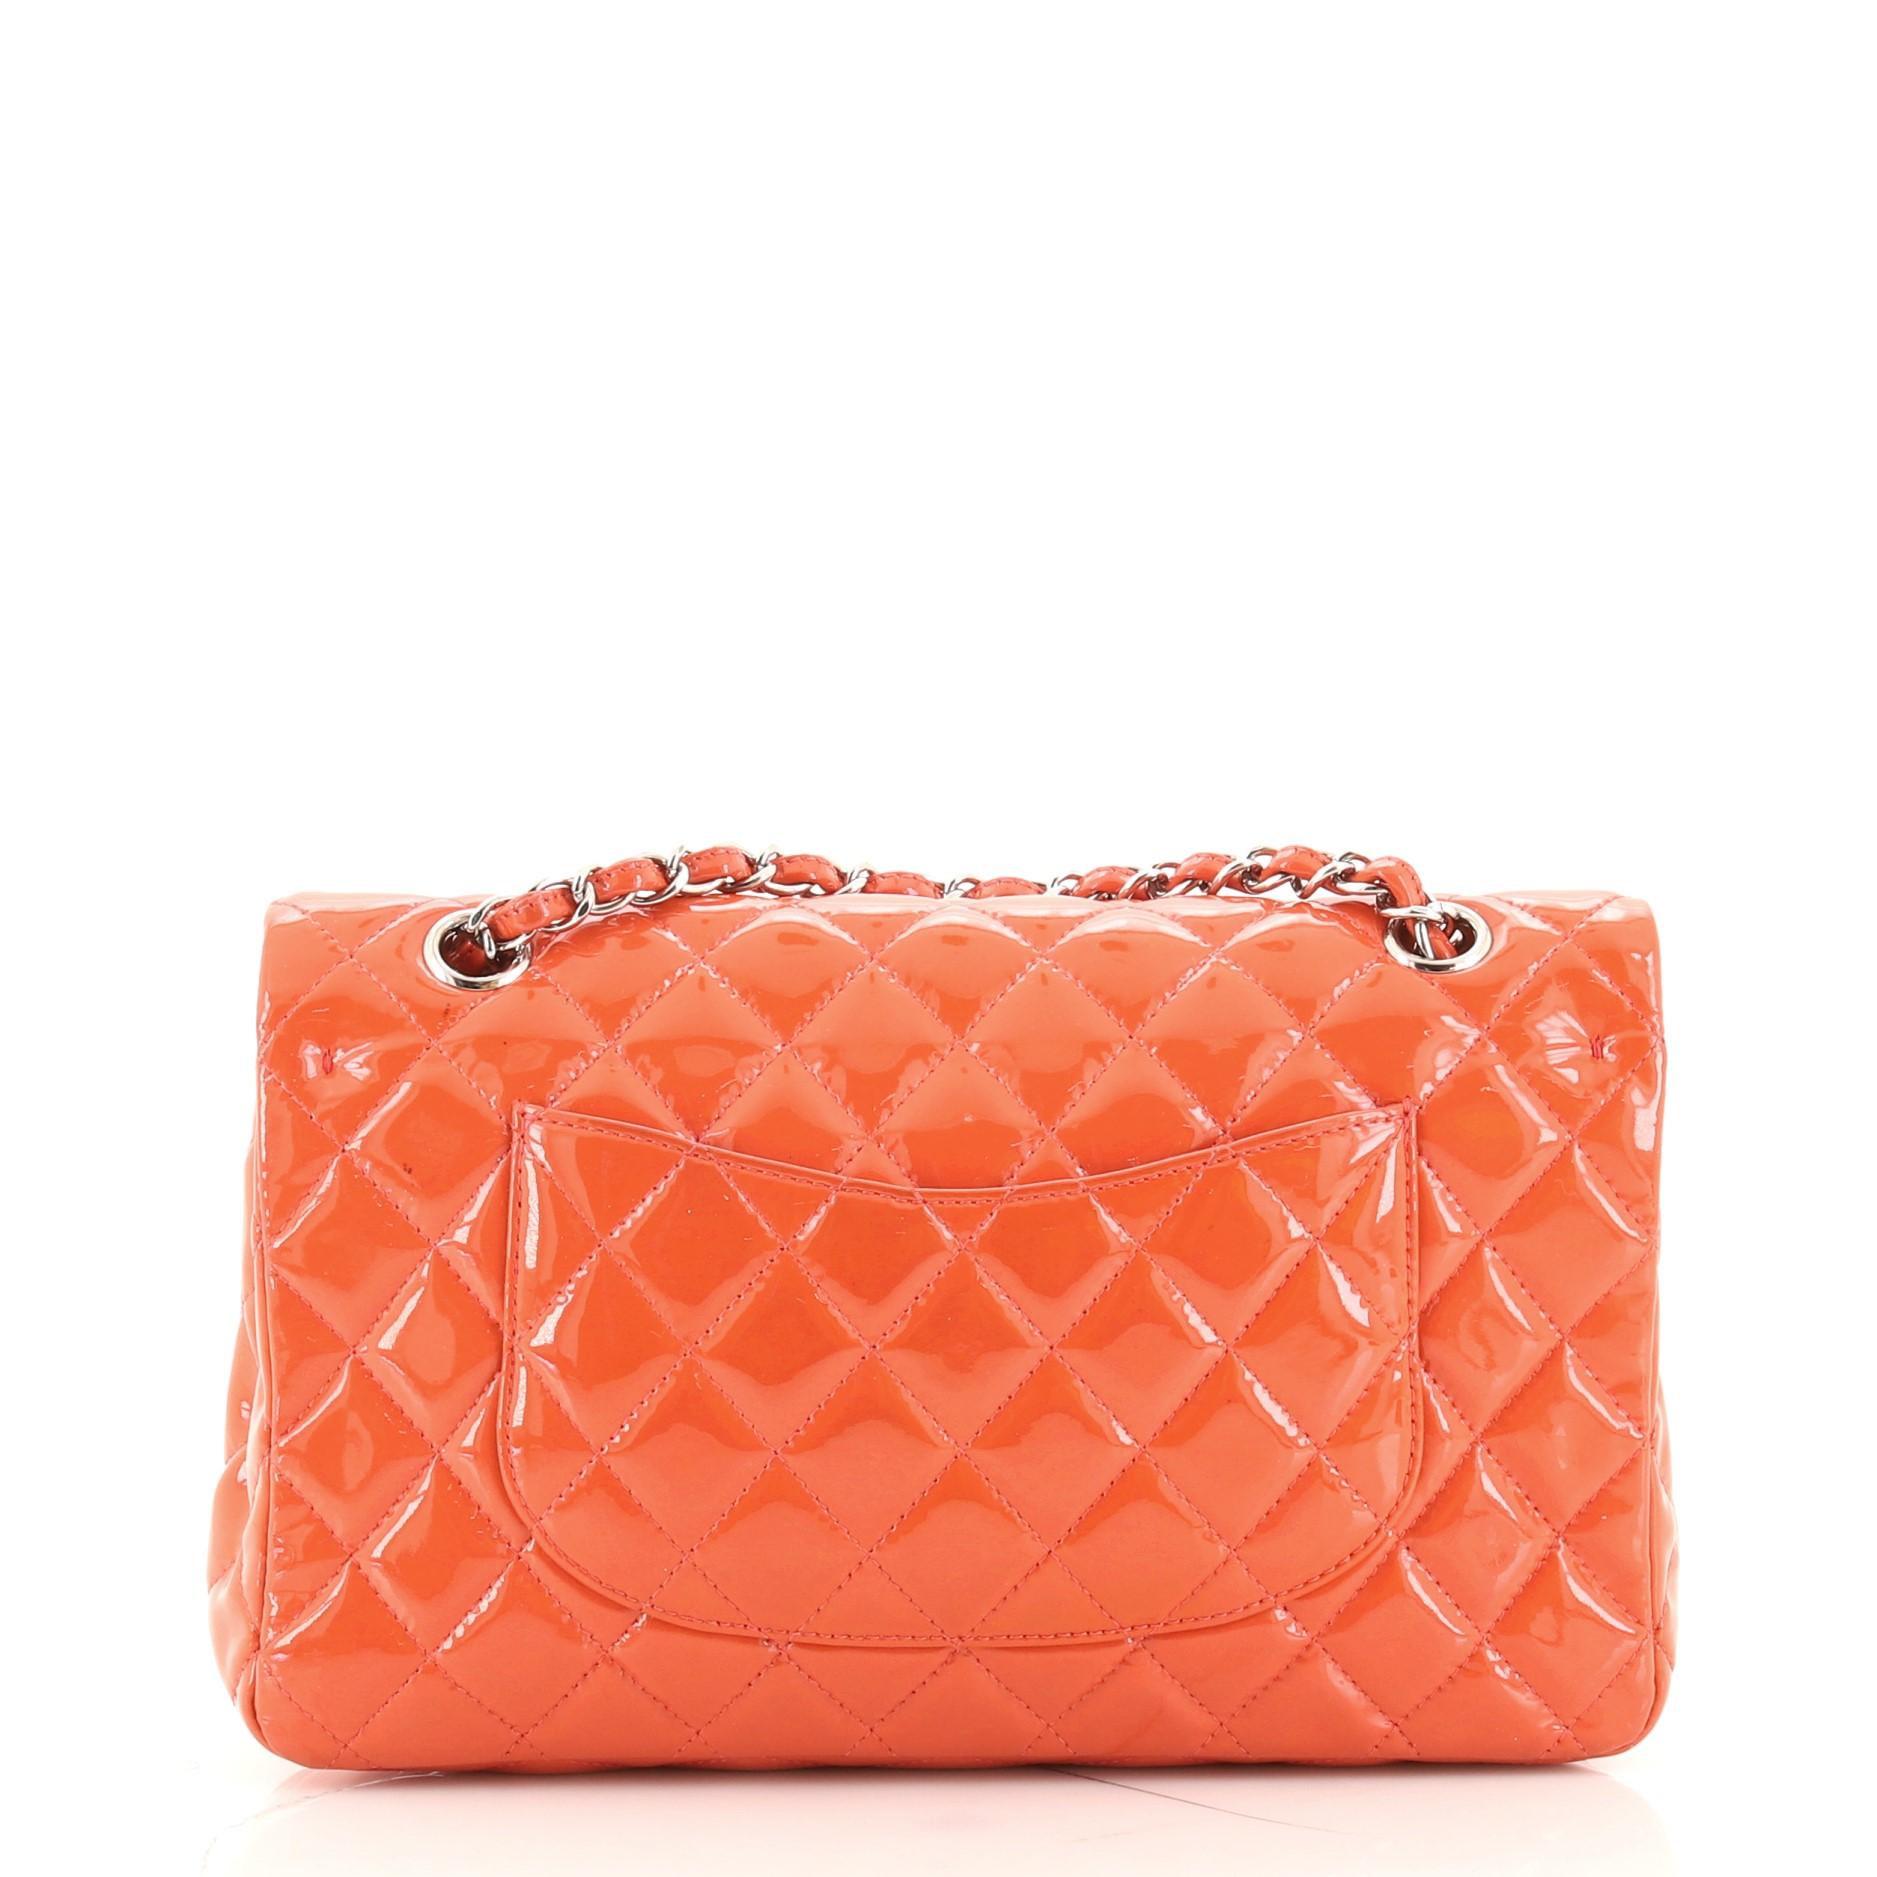 Orange Chanel Classic Double Flap Bag Quilted Patent Medium